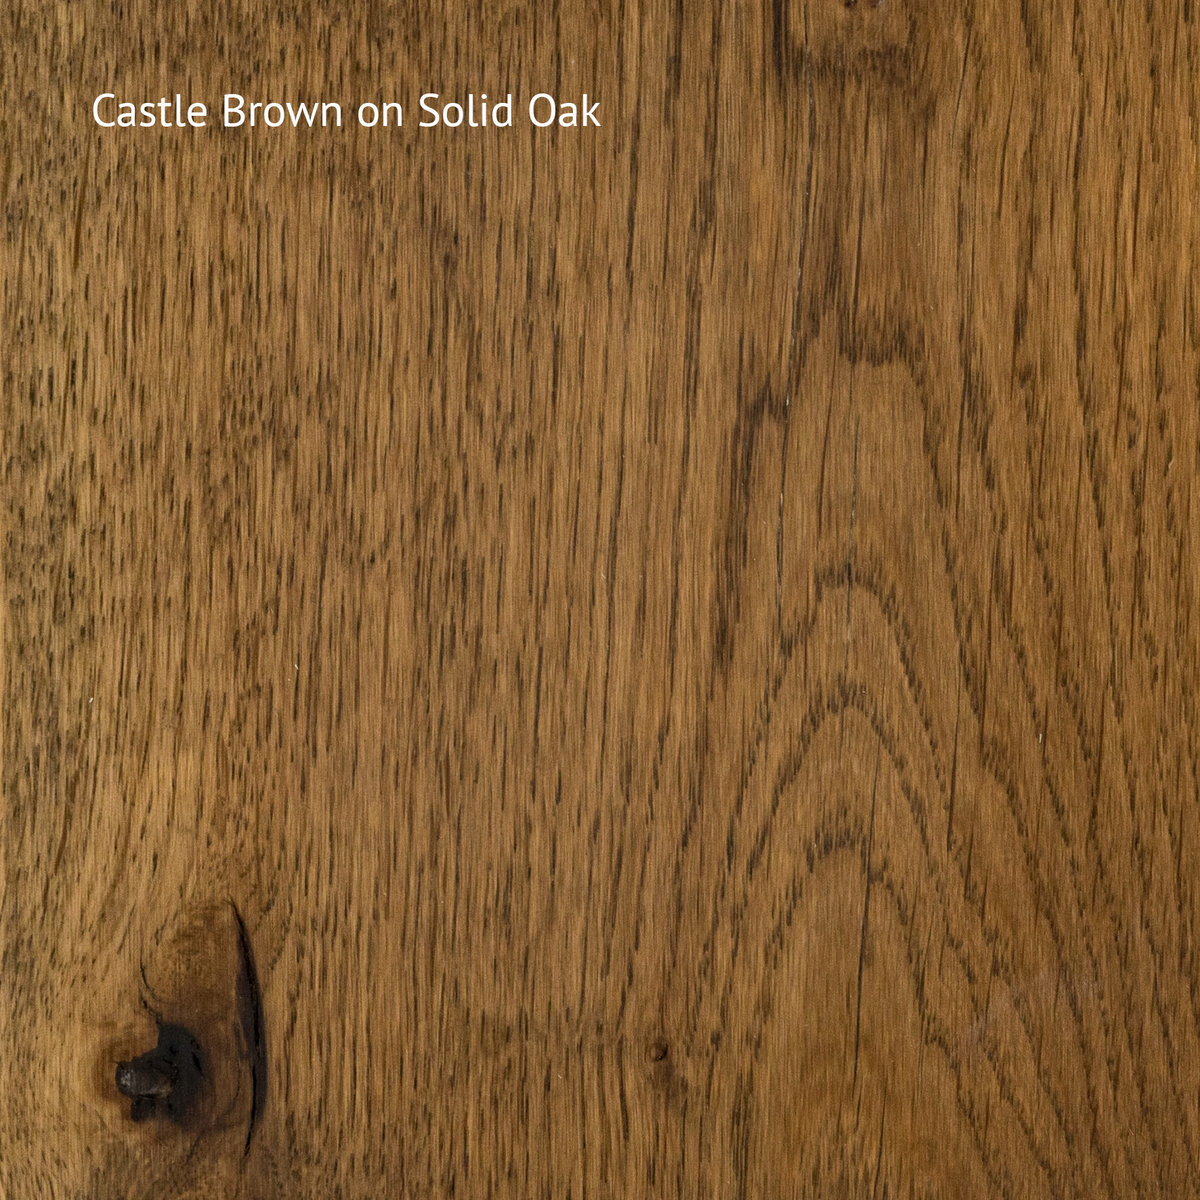 Oak Finish Samples - Made In The Cellar